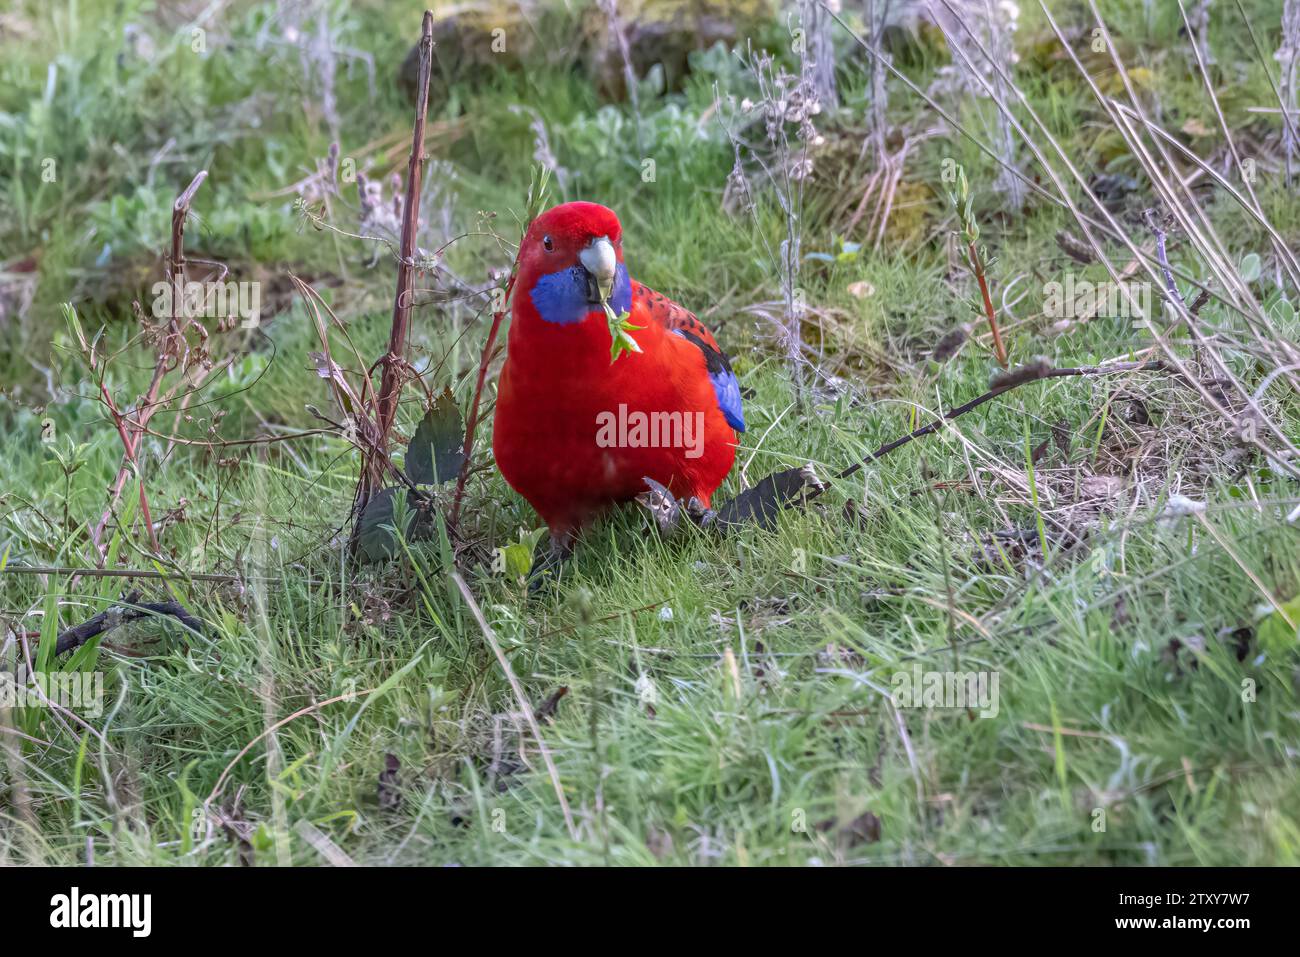 Crimson Rosella (Platycercus elegans) feeding on a bunch of grasses and low bush, picking up a twig of green foliage on its beak. Stock Photo